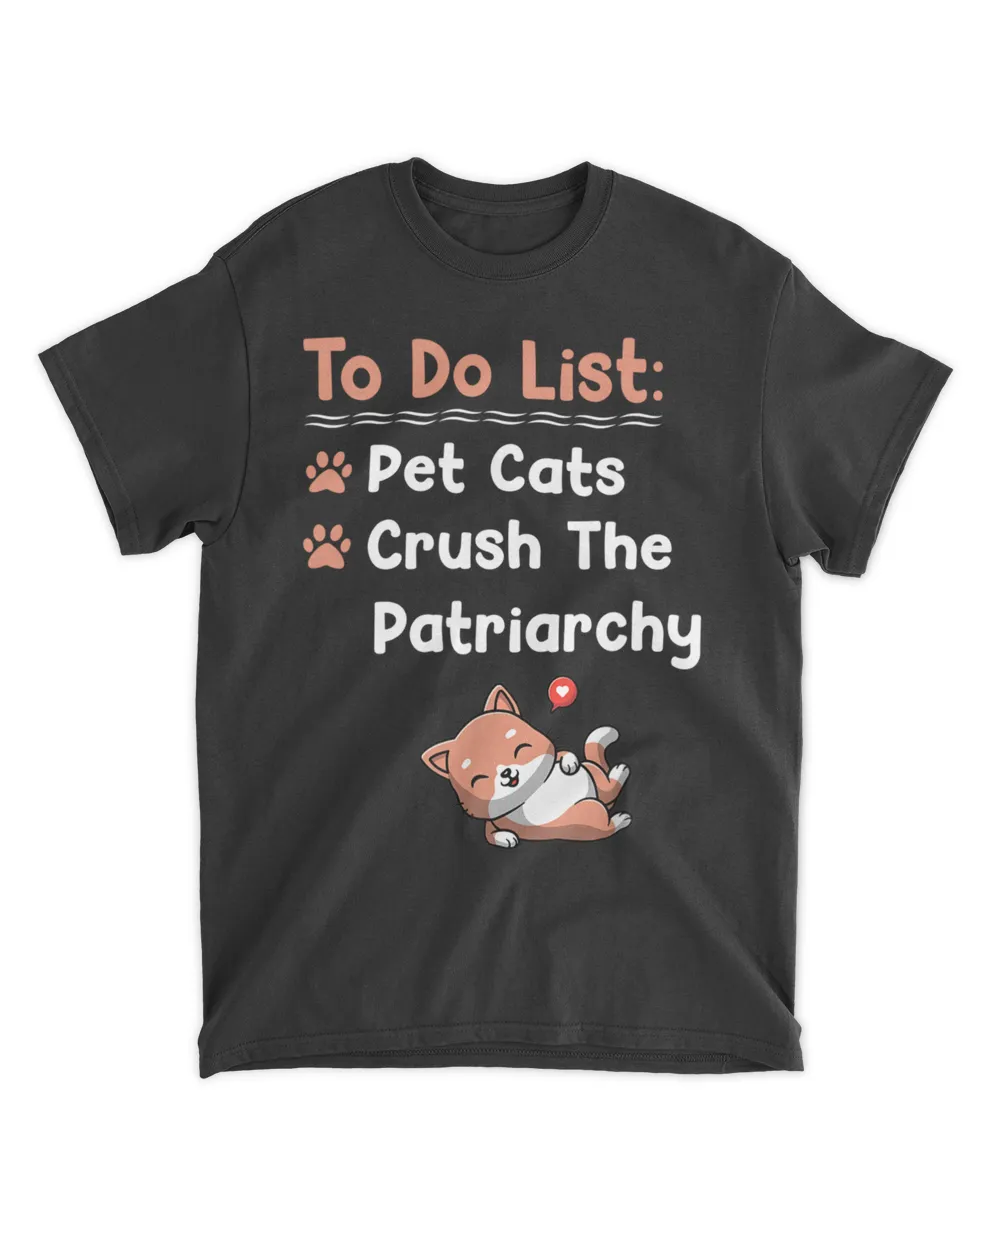 To Do List Pet Cats Crush The Patriarchy, Civil Rights HOC100423A15